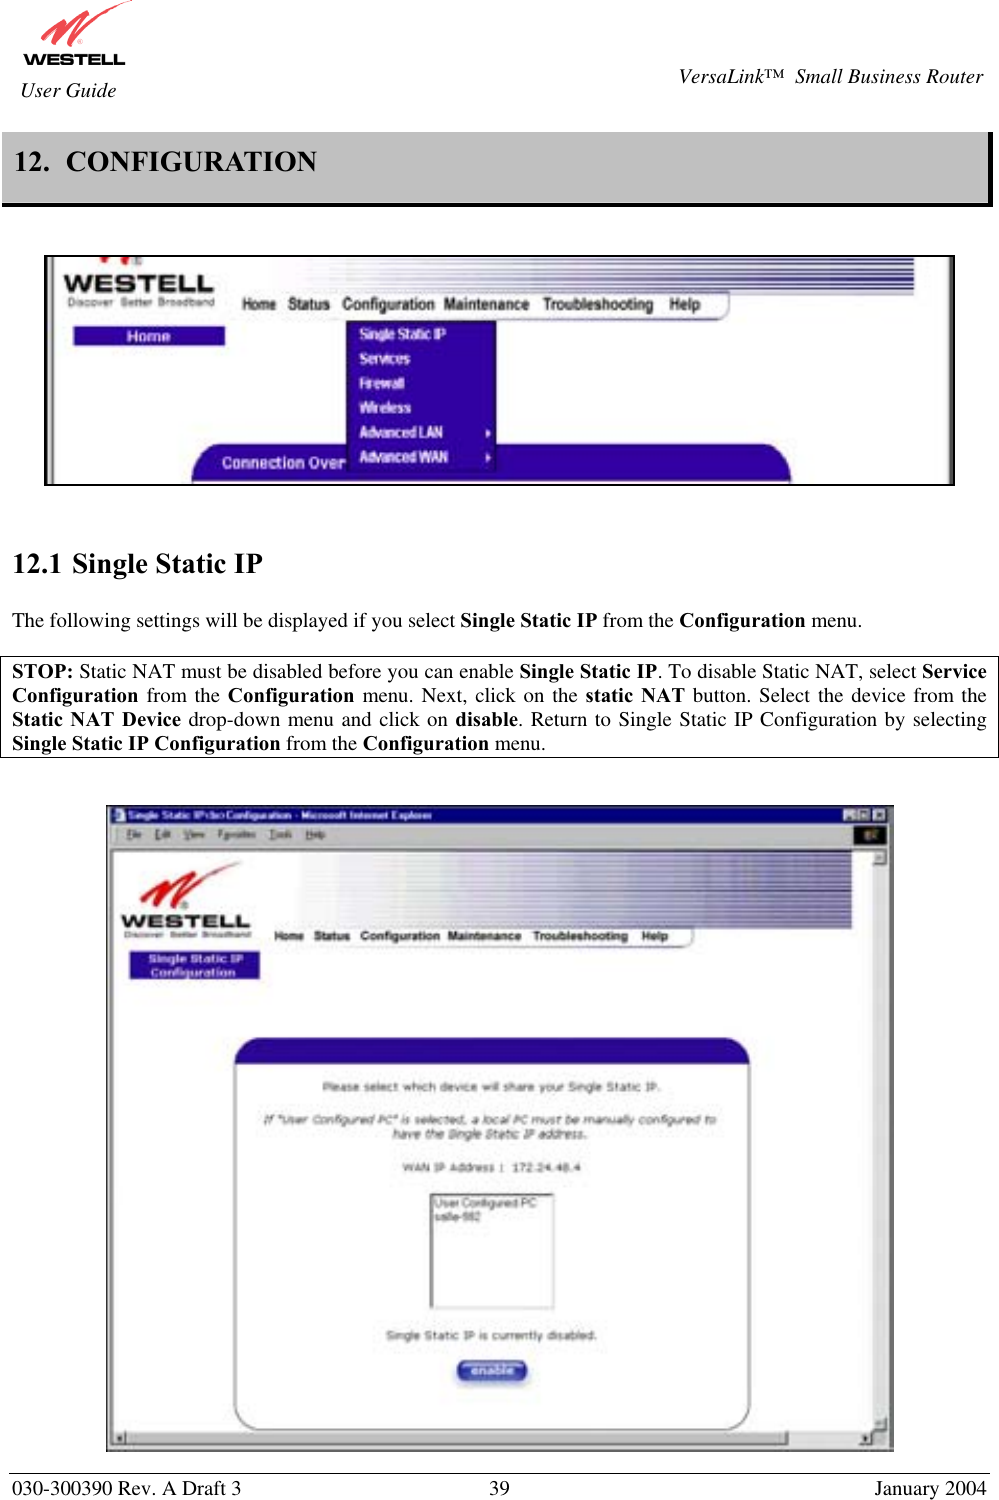       030-300390 Rev. A Draft 3  39  January 2004  VersaLink™  Small Business Router  User Guide 12.  CONFIGURATION       12.1 Single Static IP  The following settings will be displayed if you select Single Static IP from the Configuration menu.   STOP: Static NAT must be disabled before you can enable Single Static IP. To disable Static NAT, select Service Configuration from the Configuration menu. Next, click on the static NAT button. Select the device from the Static NAT Device drop-down menu and click on disable. Return to Single Static IP Configuration by selecting Single Static IP Configuration from the Configuration menu.    